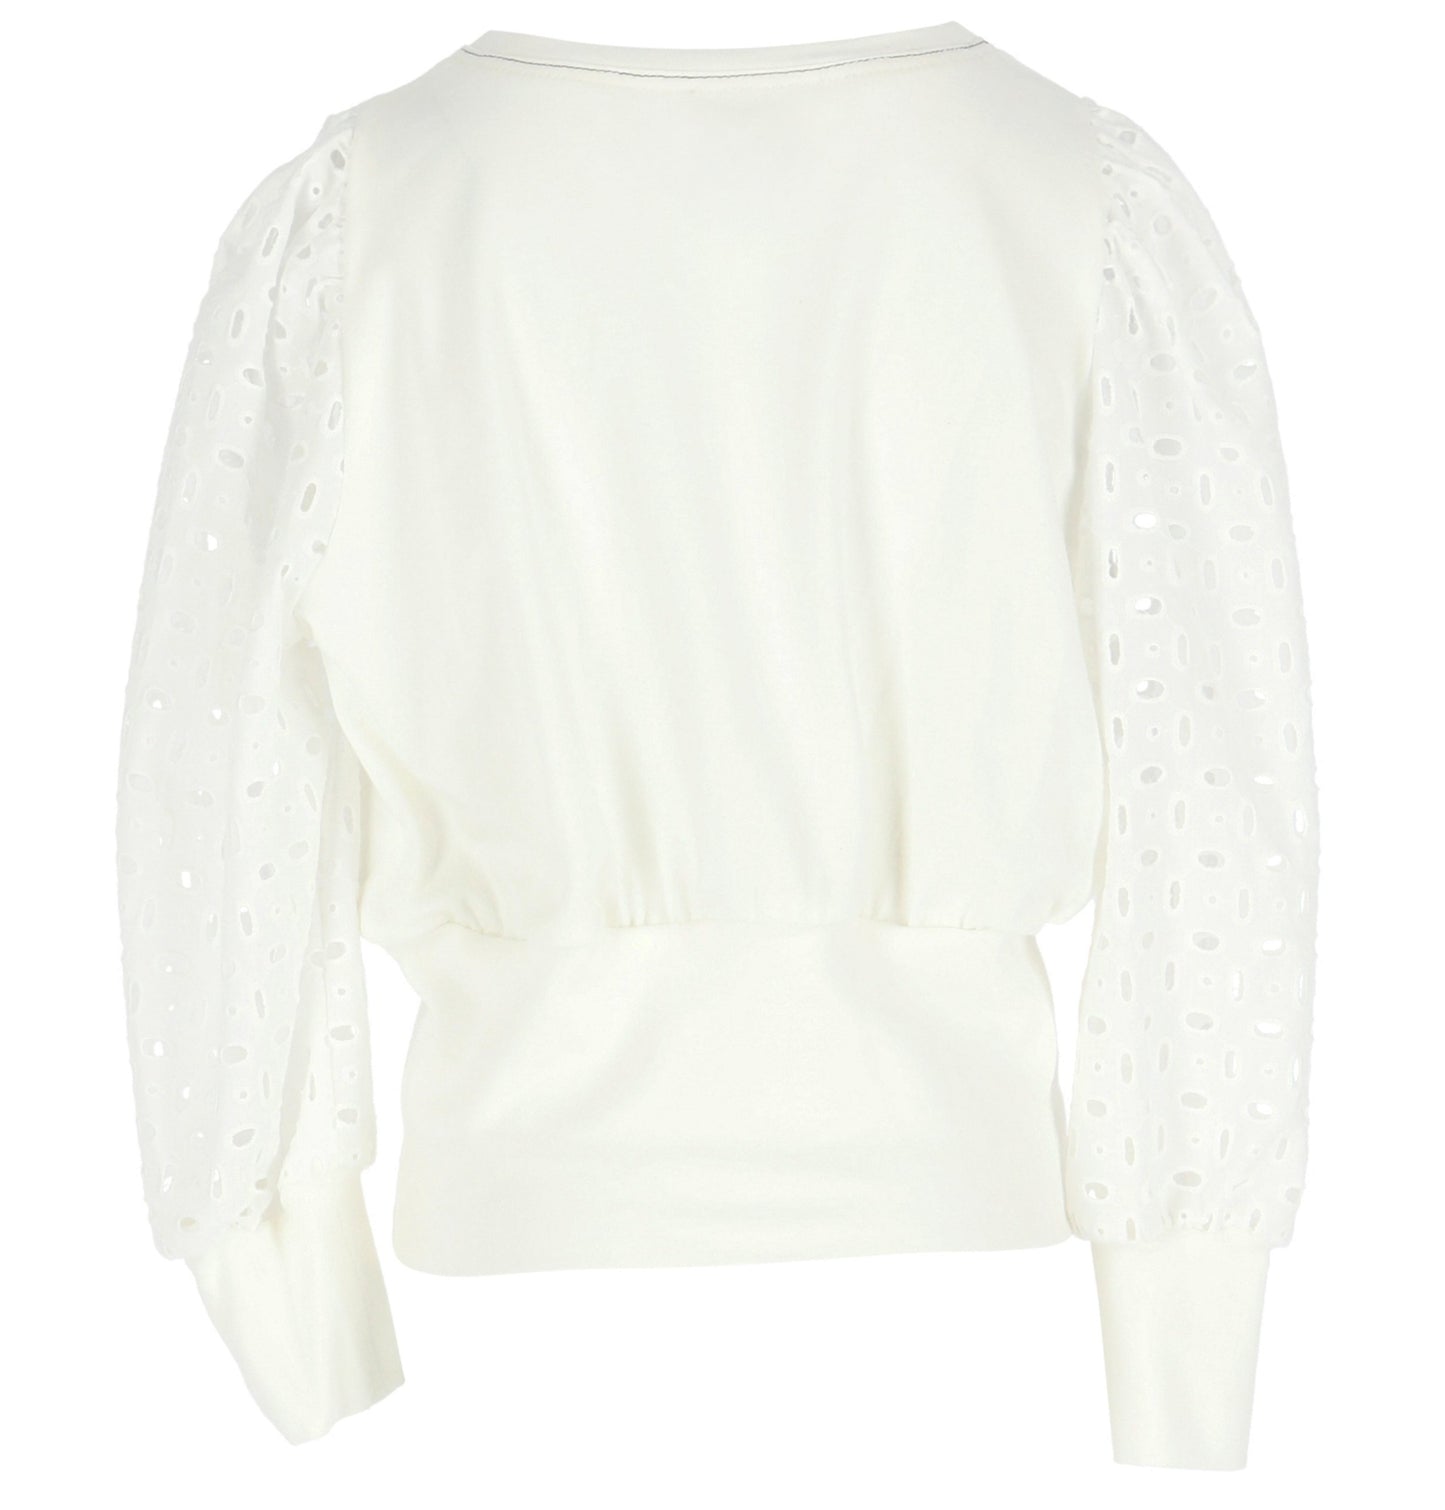 Miss L.Ray Mia Broderie Anglaise Top